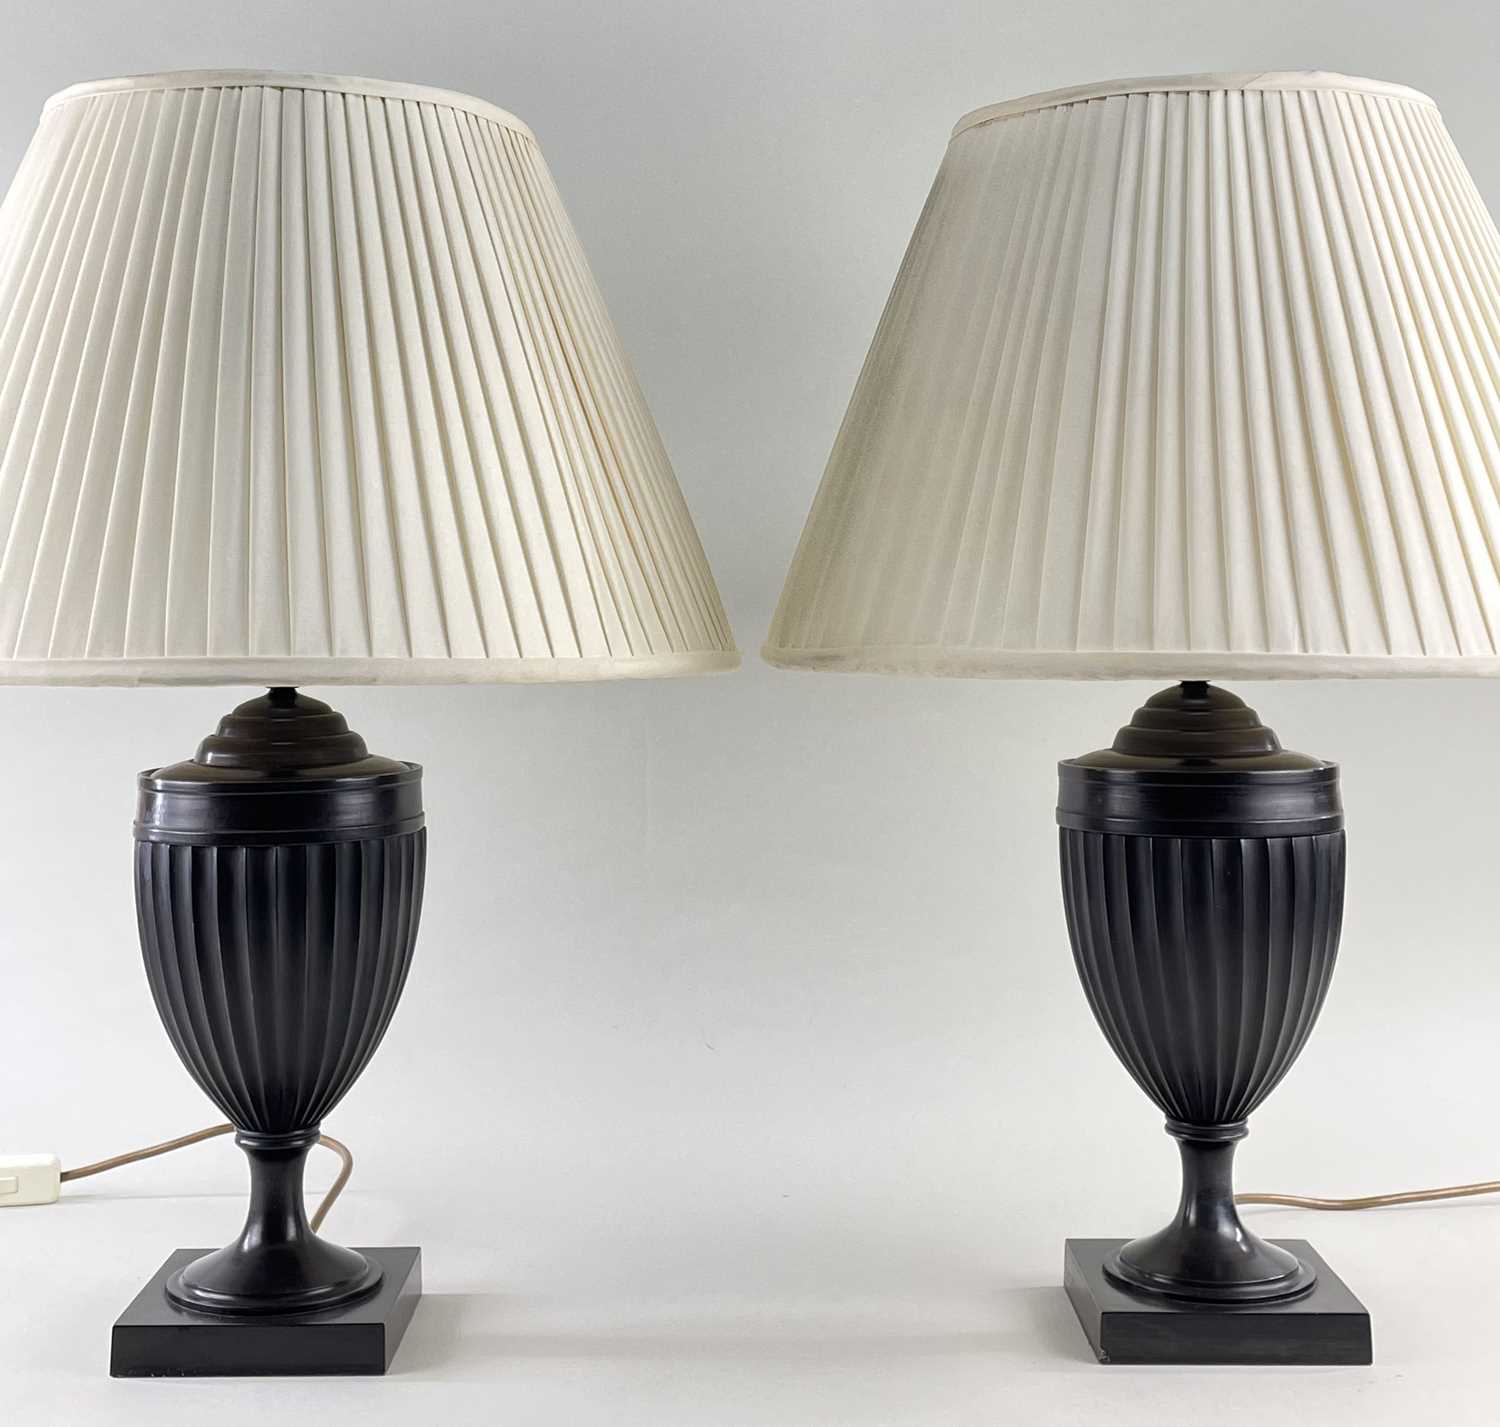 PAIR MODERN BRONZE URN TABLE LAMPS, possibly by Kullman (Holland), classical fluted form, on